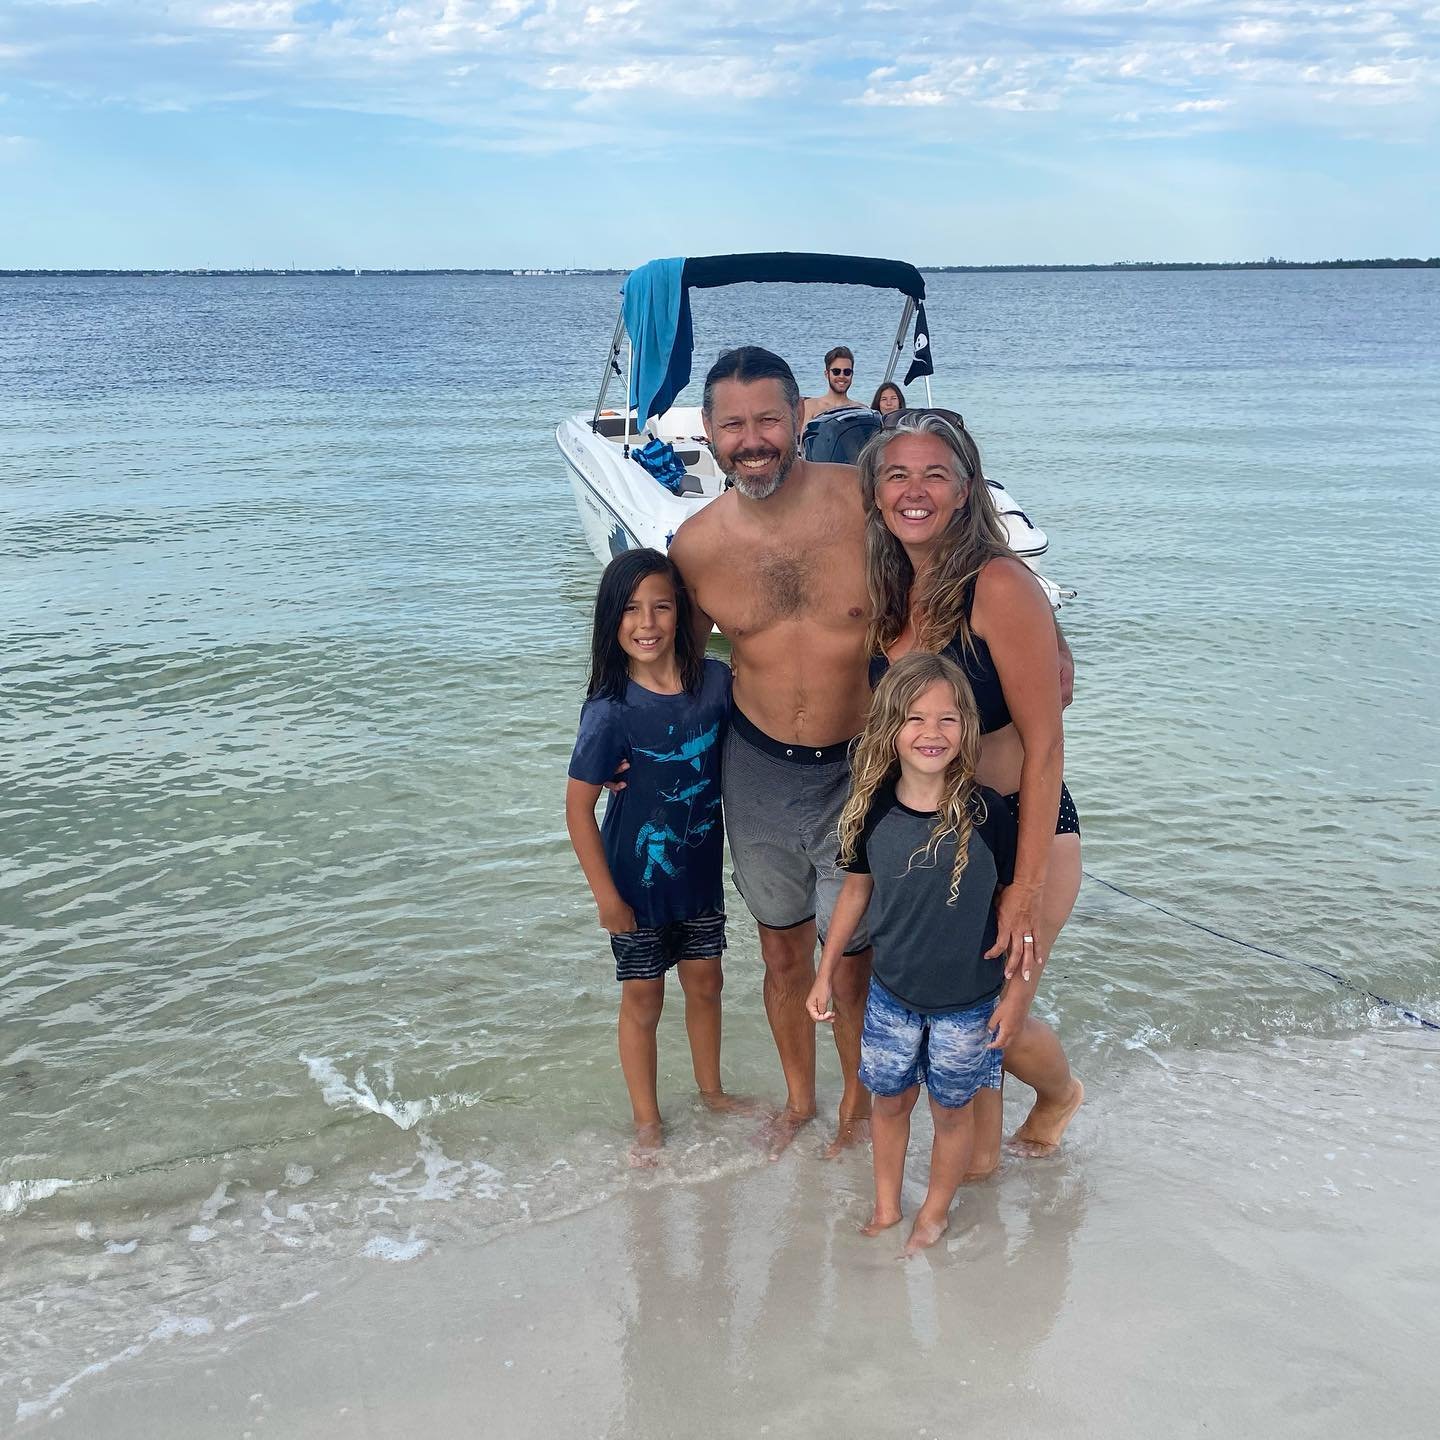 When you meet new boat friends who not only like to play football on the beach, but also love music, and then ask if you want a family pic and they actually capture the big kids in the back, as well. Thanks, friends!! 👏🏽☺️🚤🌊